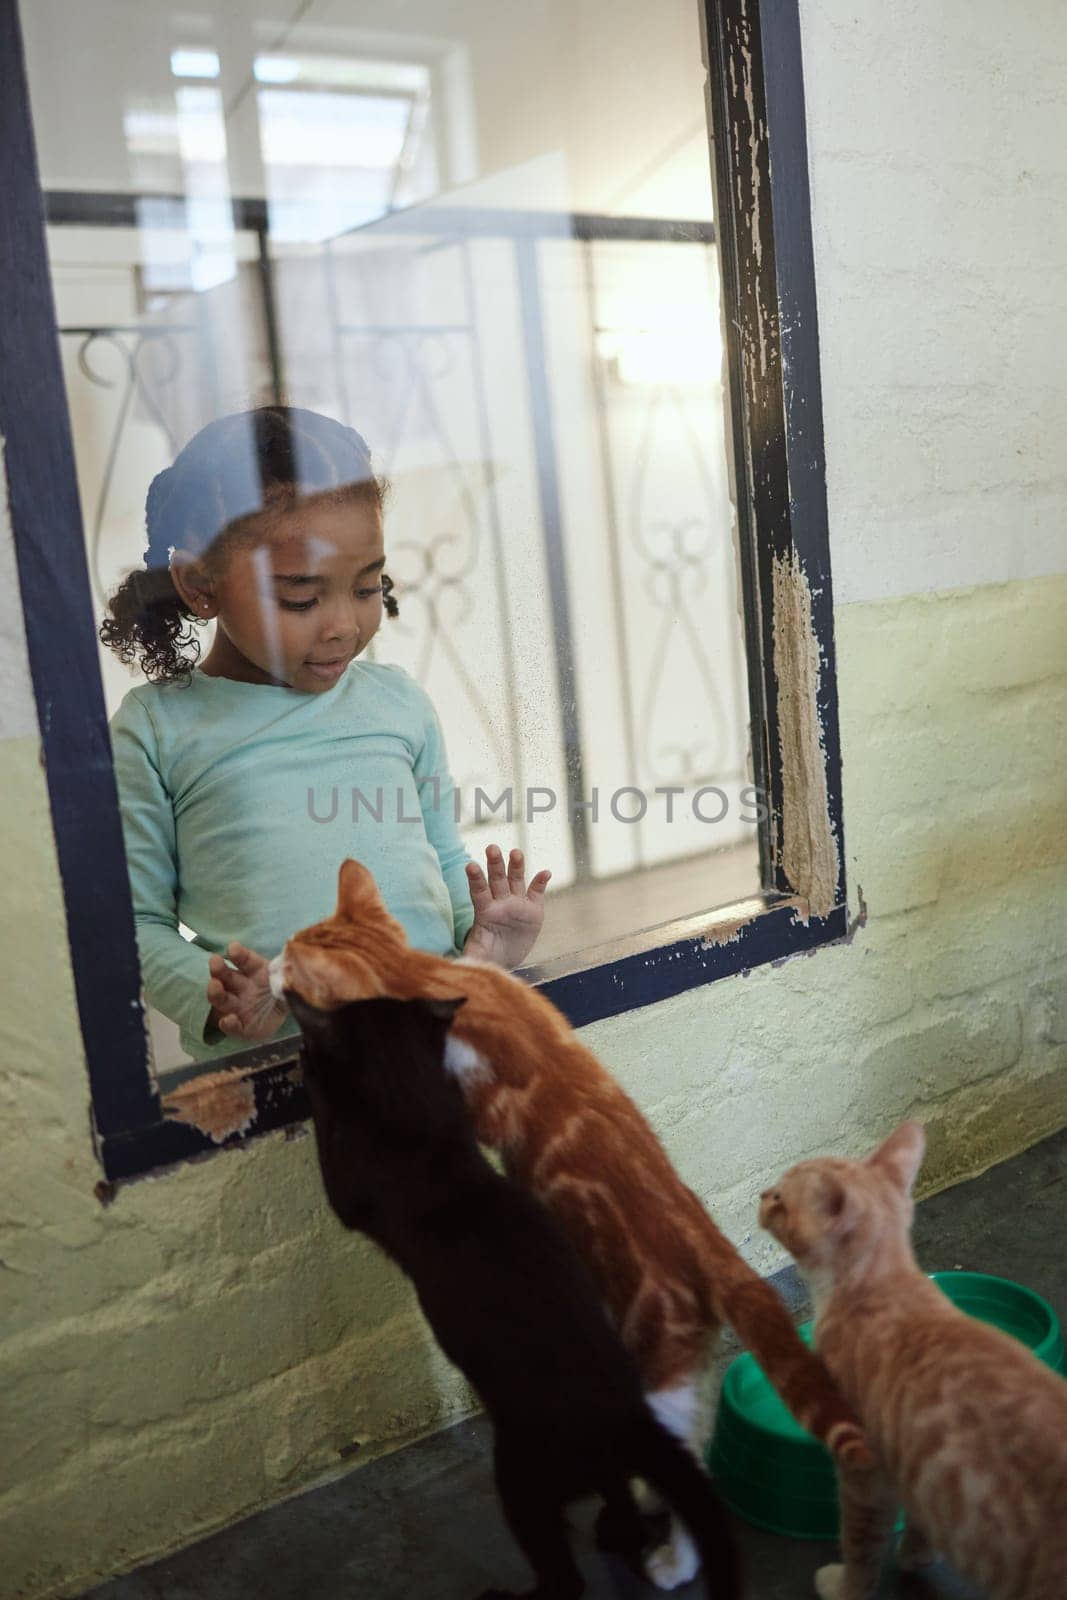 Child, girl or glass window of cat shopping in animal shelter, feline community charity or homeless rescue animals development. Kittens, cats or pets adoption foster, curious kid or volunteer youth.